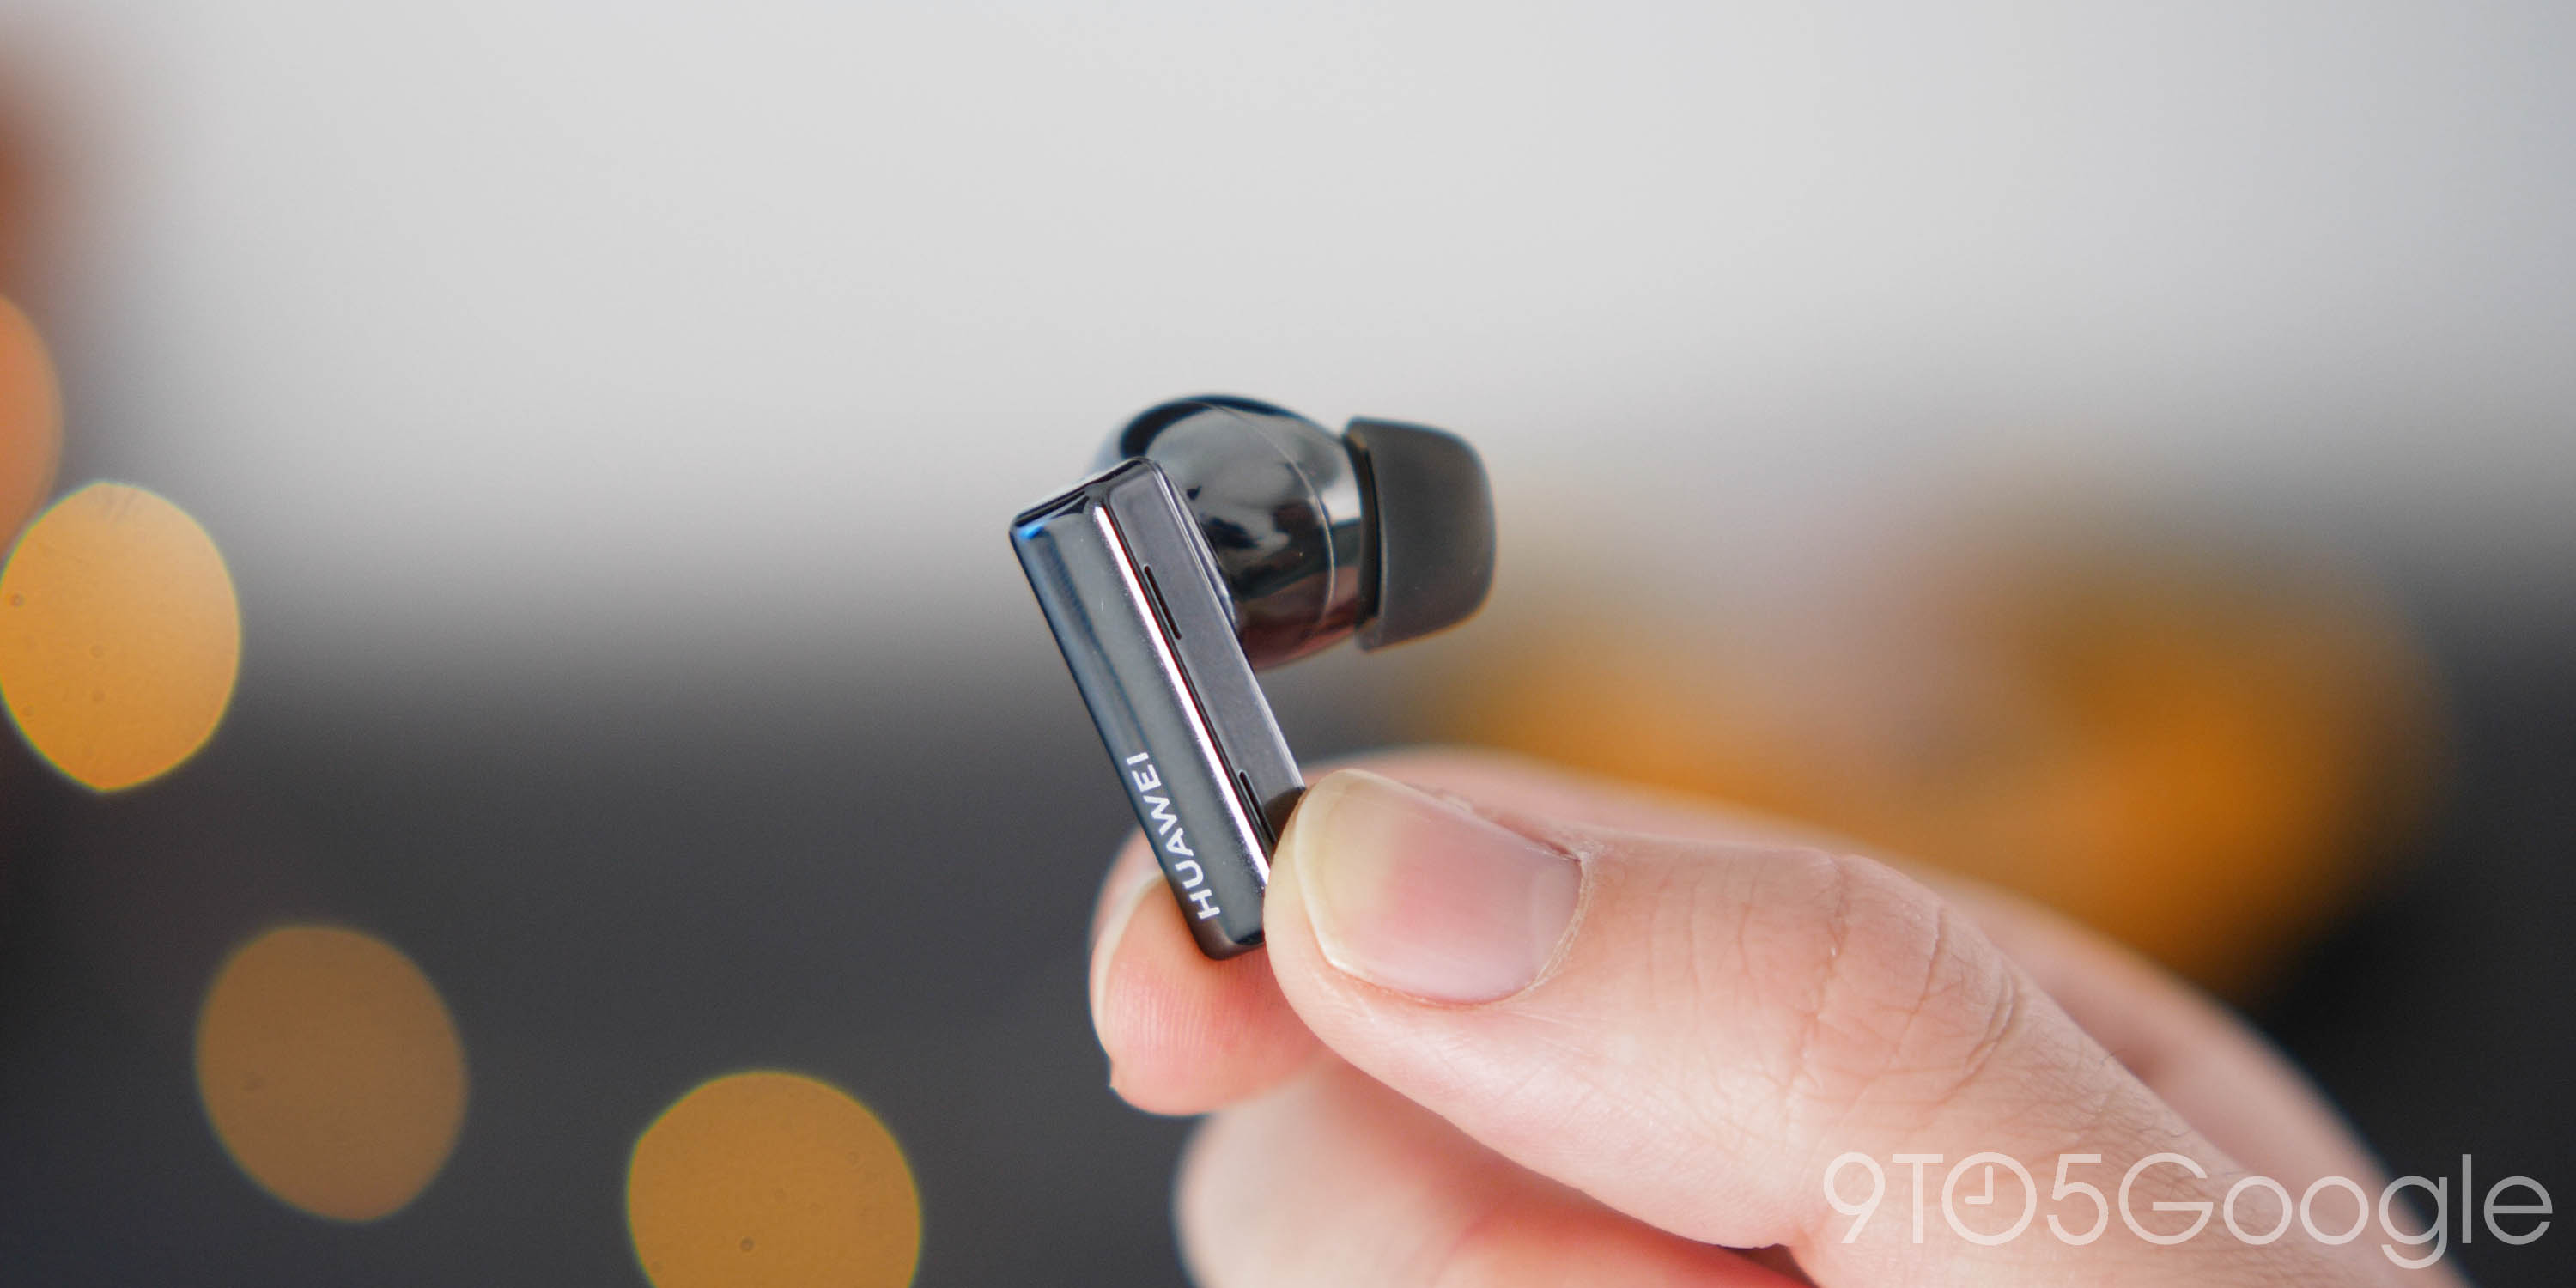 Huawei FreeBuds Pro review: Impressive ANC earbuds for Android users